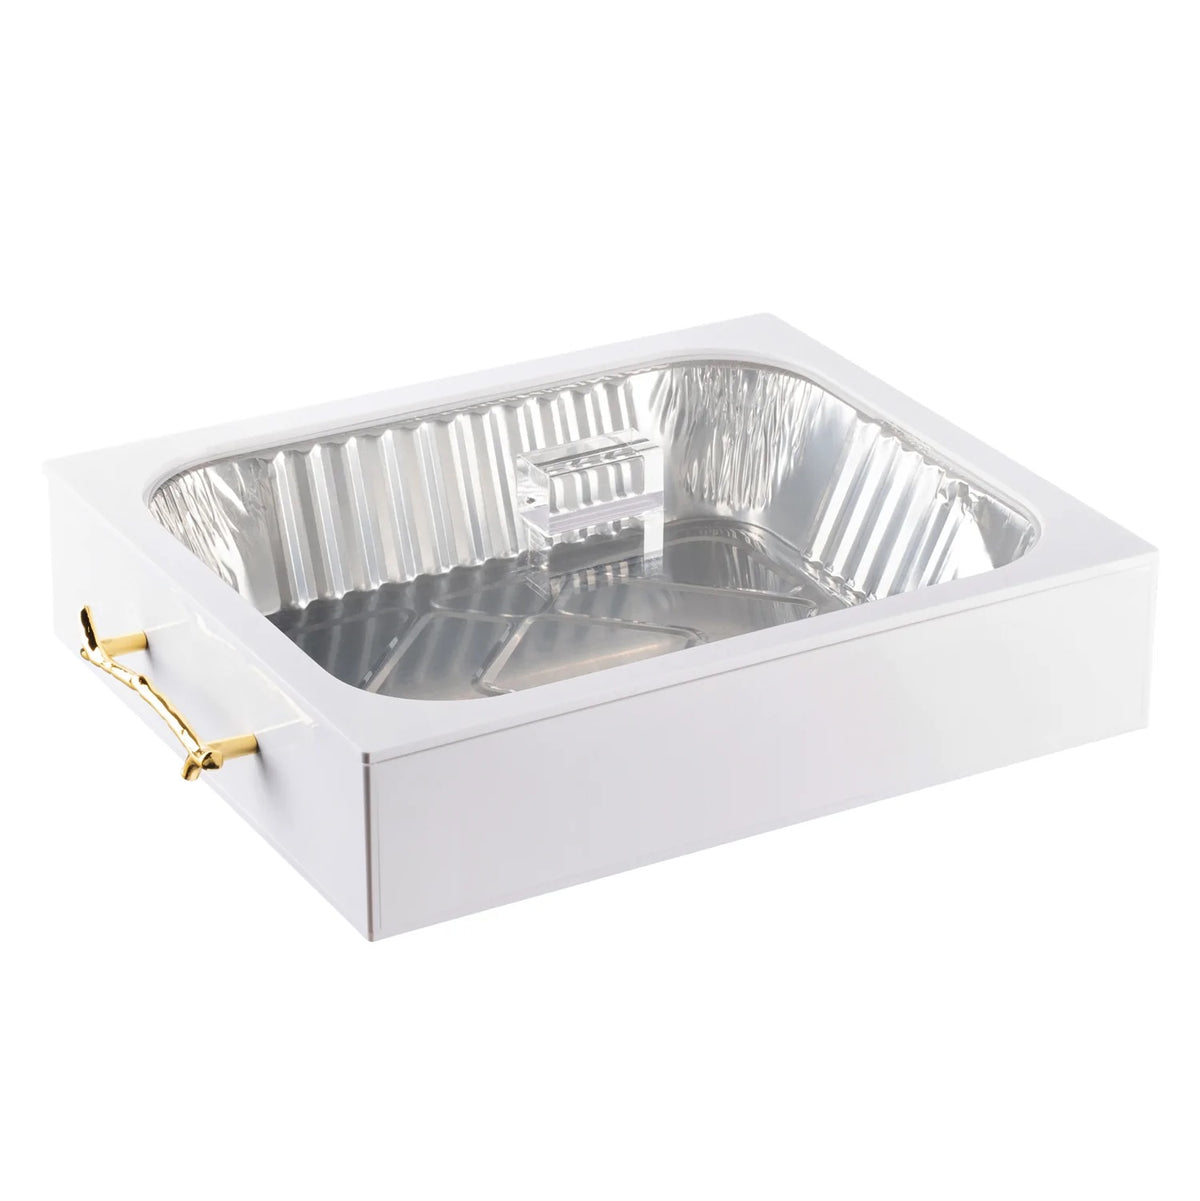 Waterdale 3 Part, 9 x13 Smart Pan Holder with Twig Handles - White & Gold